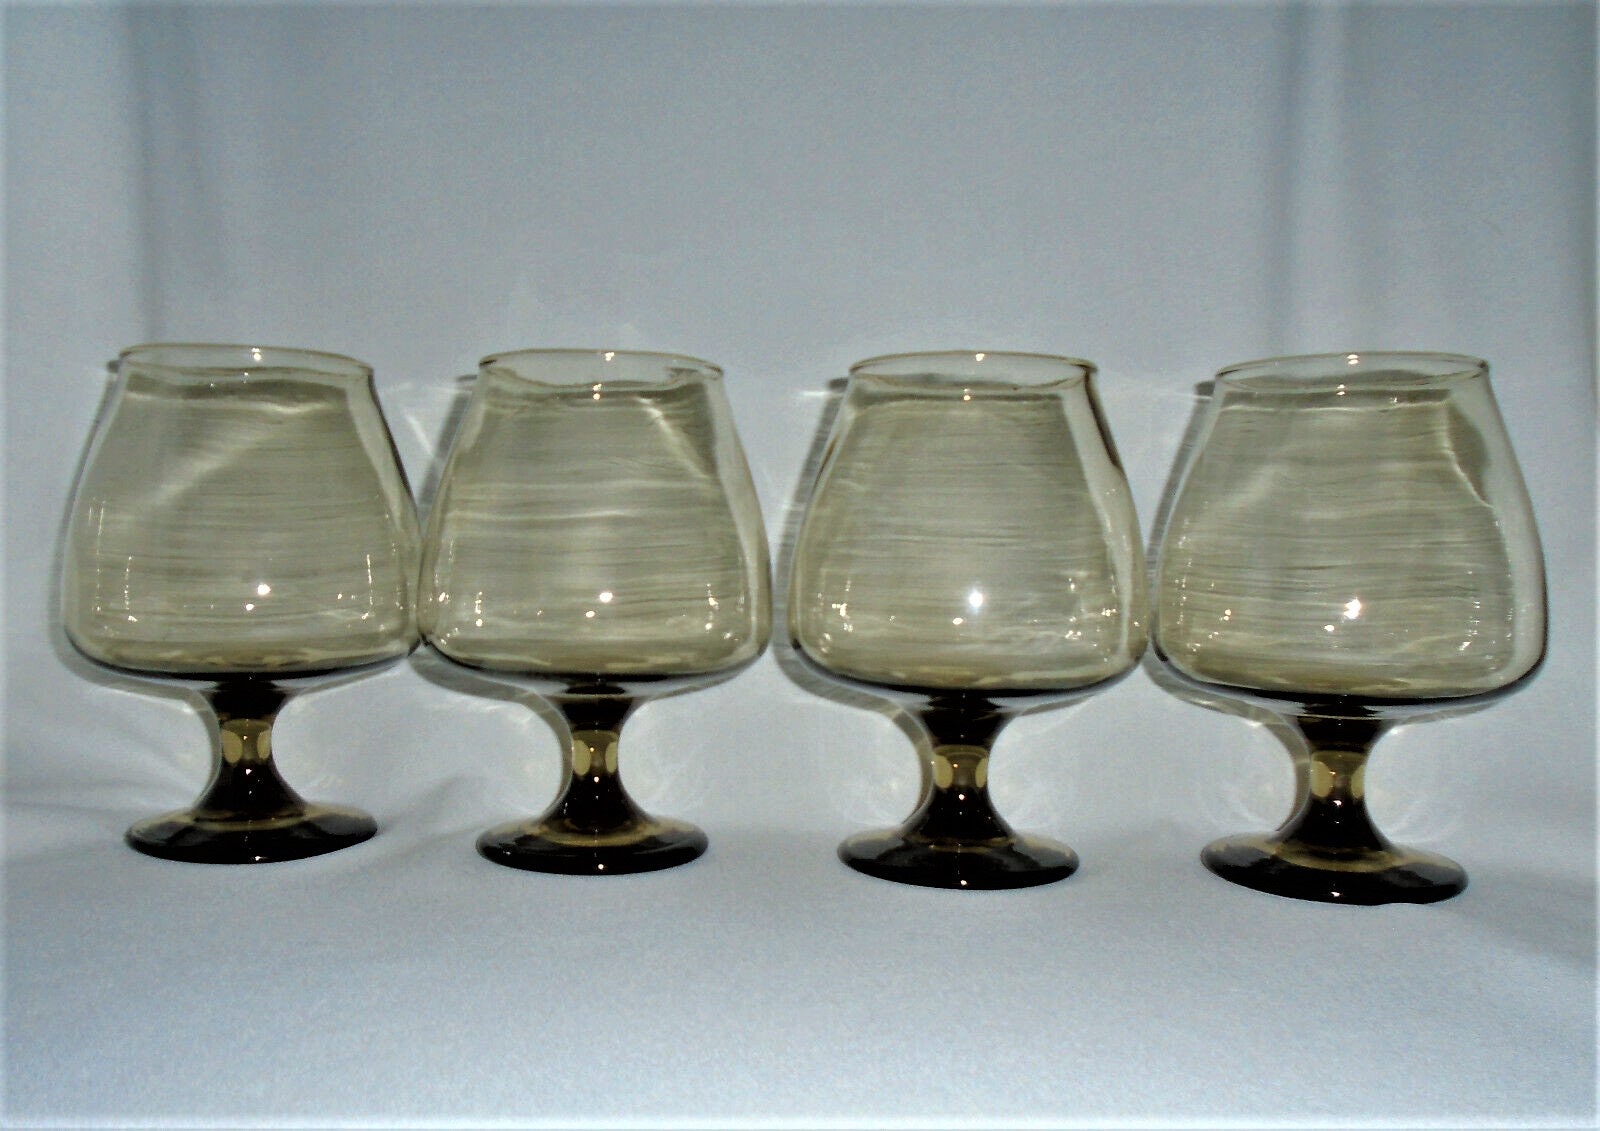 1970s Libbey Tawny Accent Champagne or Sherbet Glasses, Set of 8 - Ruby Lane